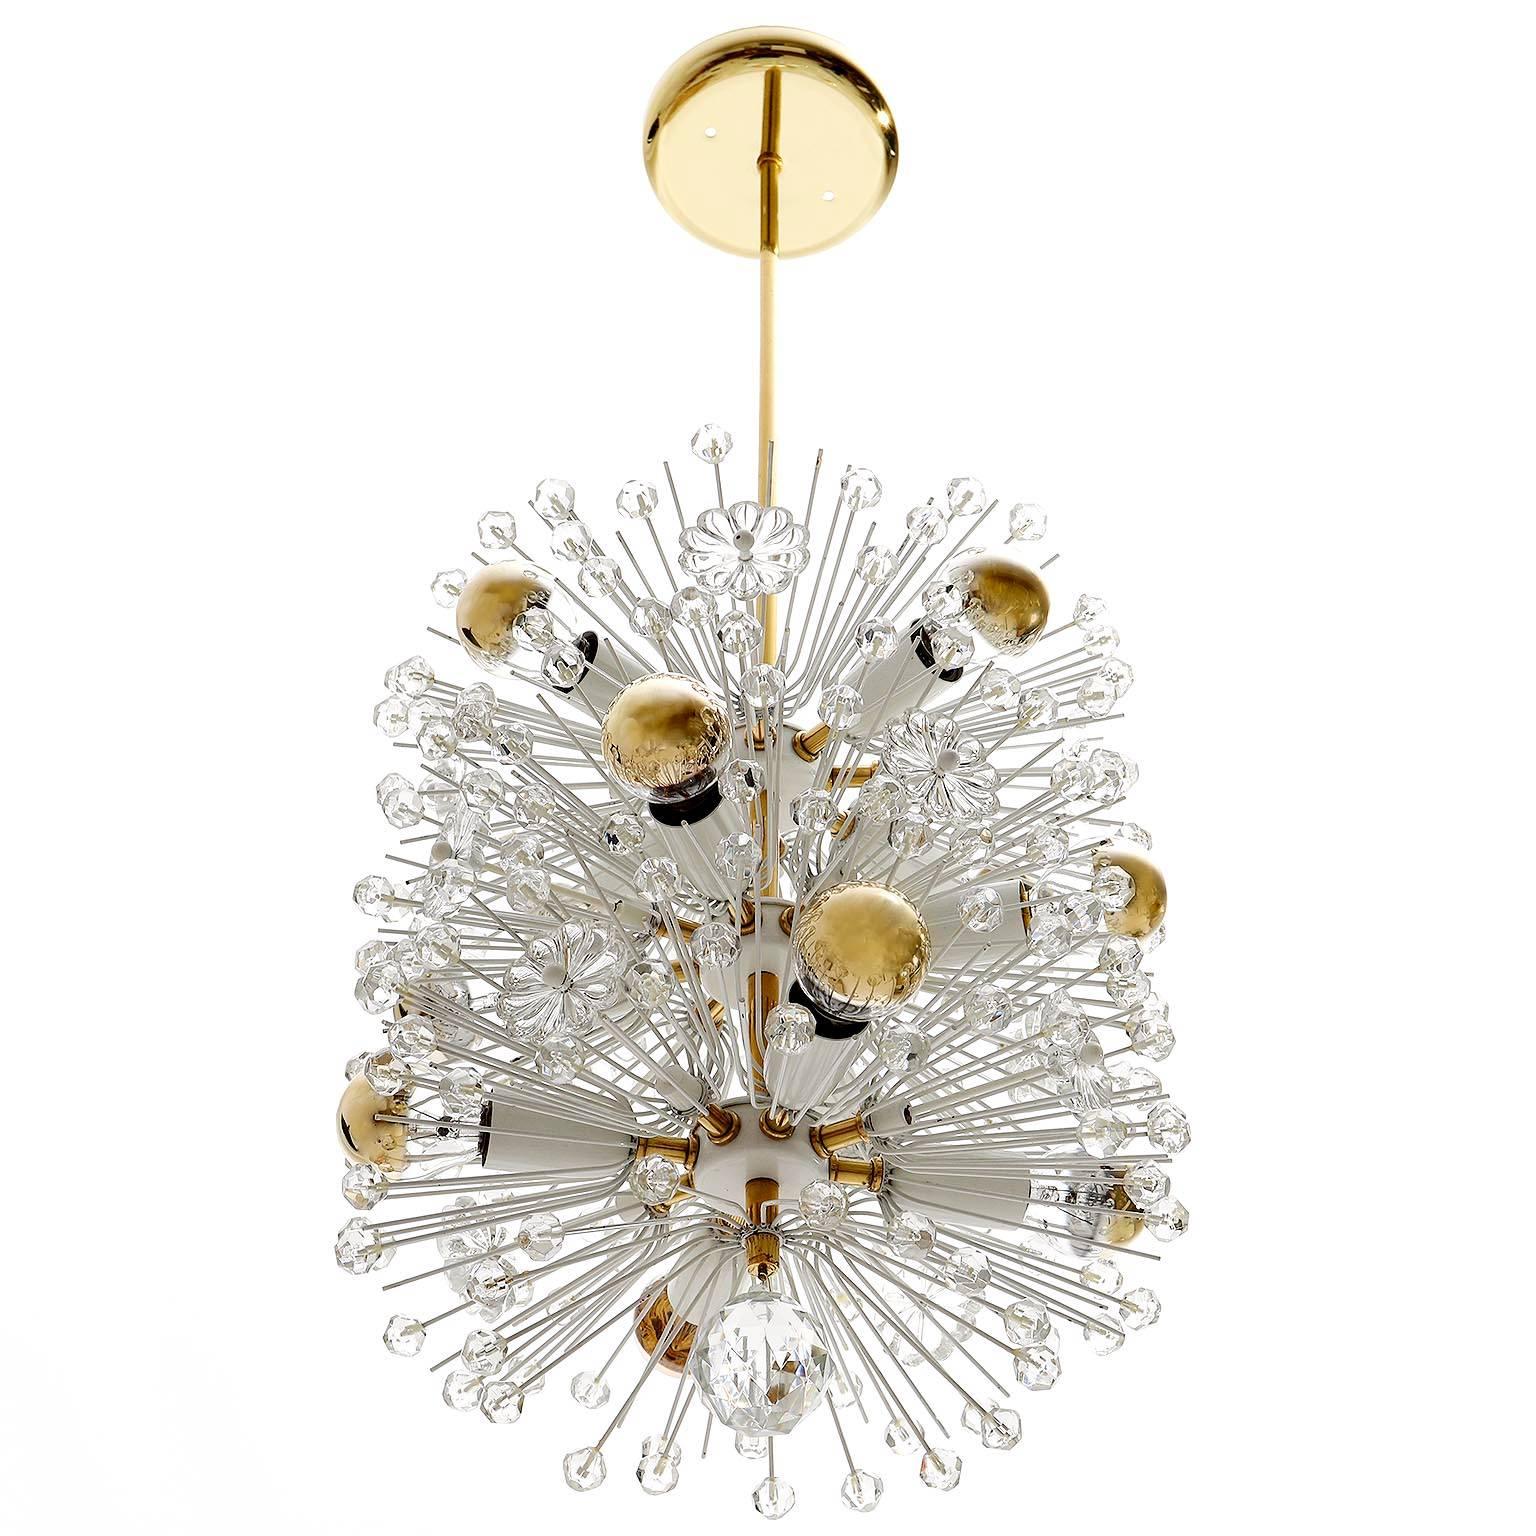 One of three outstanding Viennese sputnik / blow ball / snowball chandeliers / pendant lights by Emil Stejnar for Rupert Nikoll, Vienna, Austria, manufactured in Mid-Century, circa 1960 (late 1950s or early 1960s). 
Emil Stejnar designed this kind